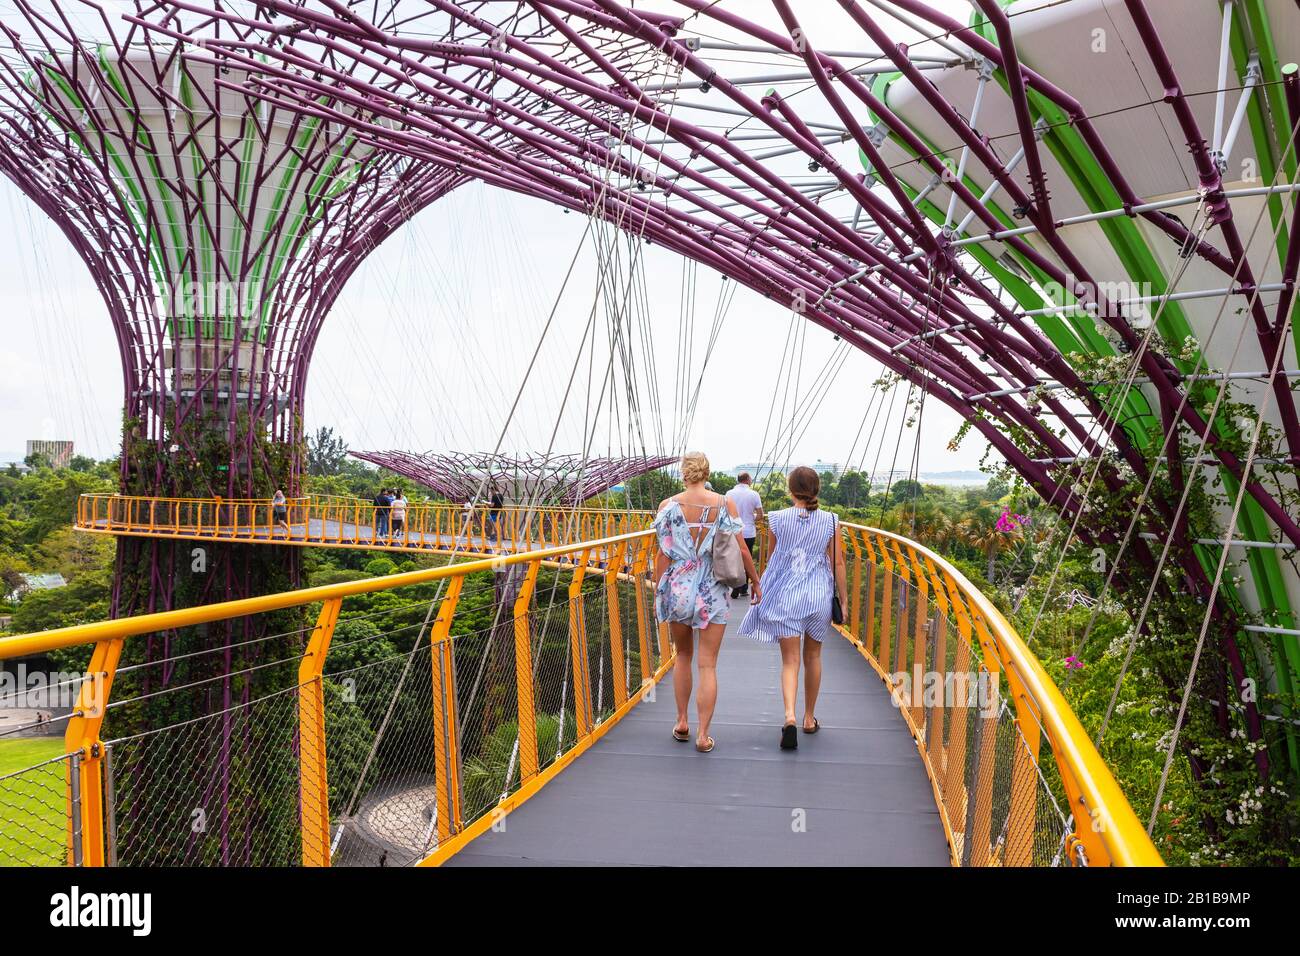 Tourists walking on the airbridge between two of the supertree structures in the Gardens by the Bay, Singapore, Asia, Stock Photo